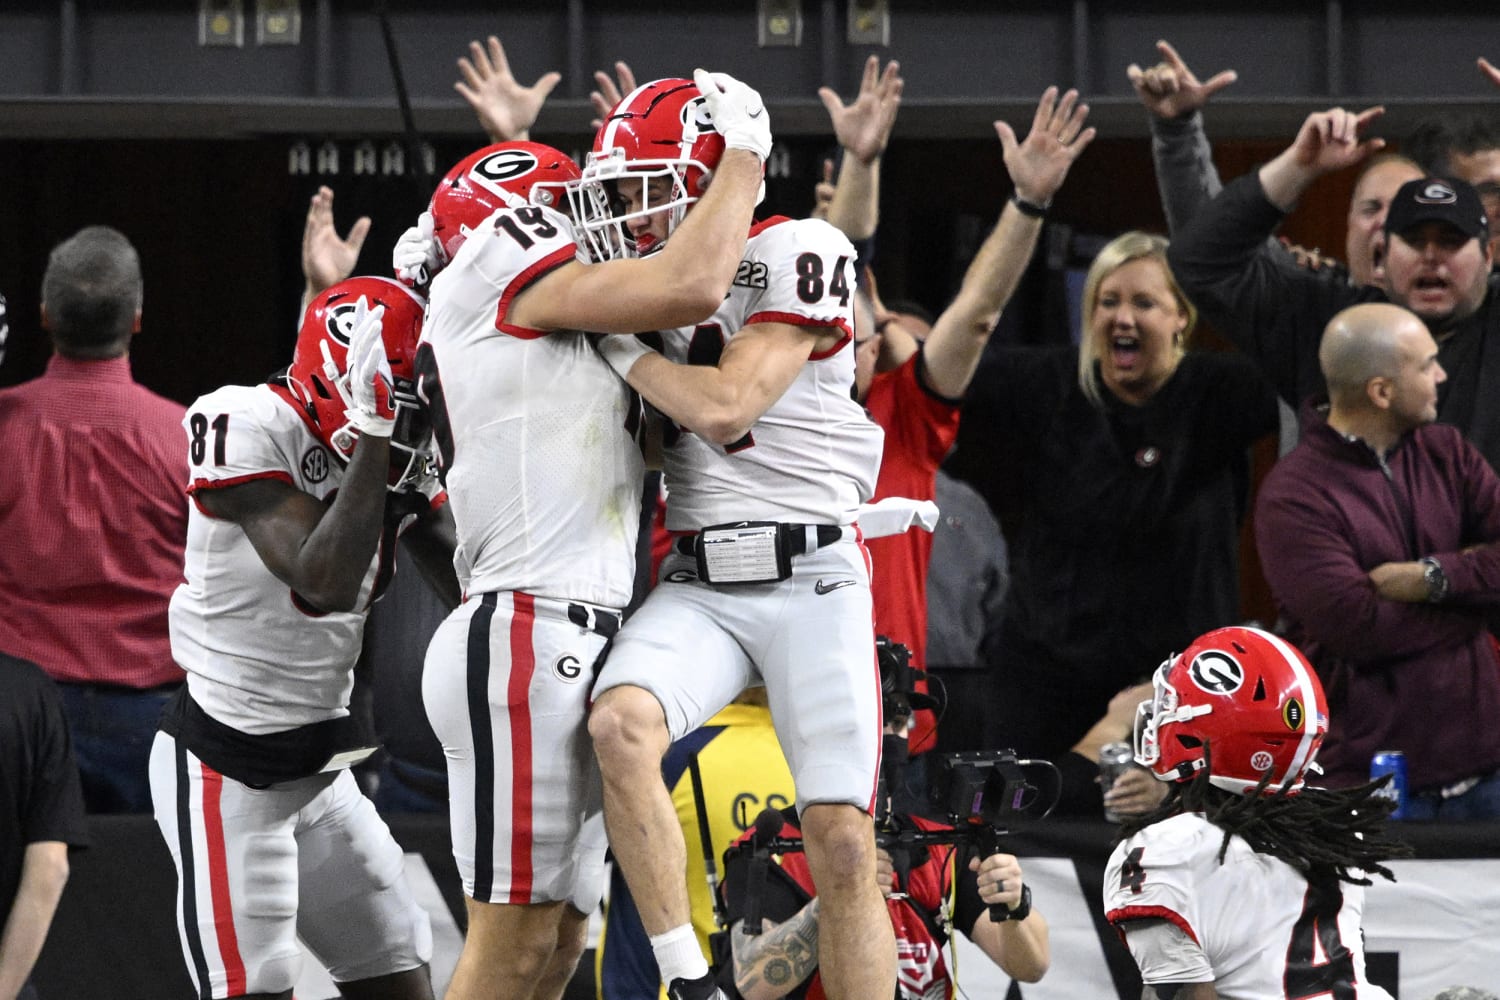 Georgia snaps 41-year title drought with 33-18 win over Alabama